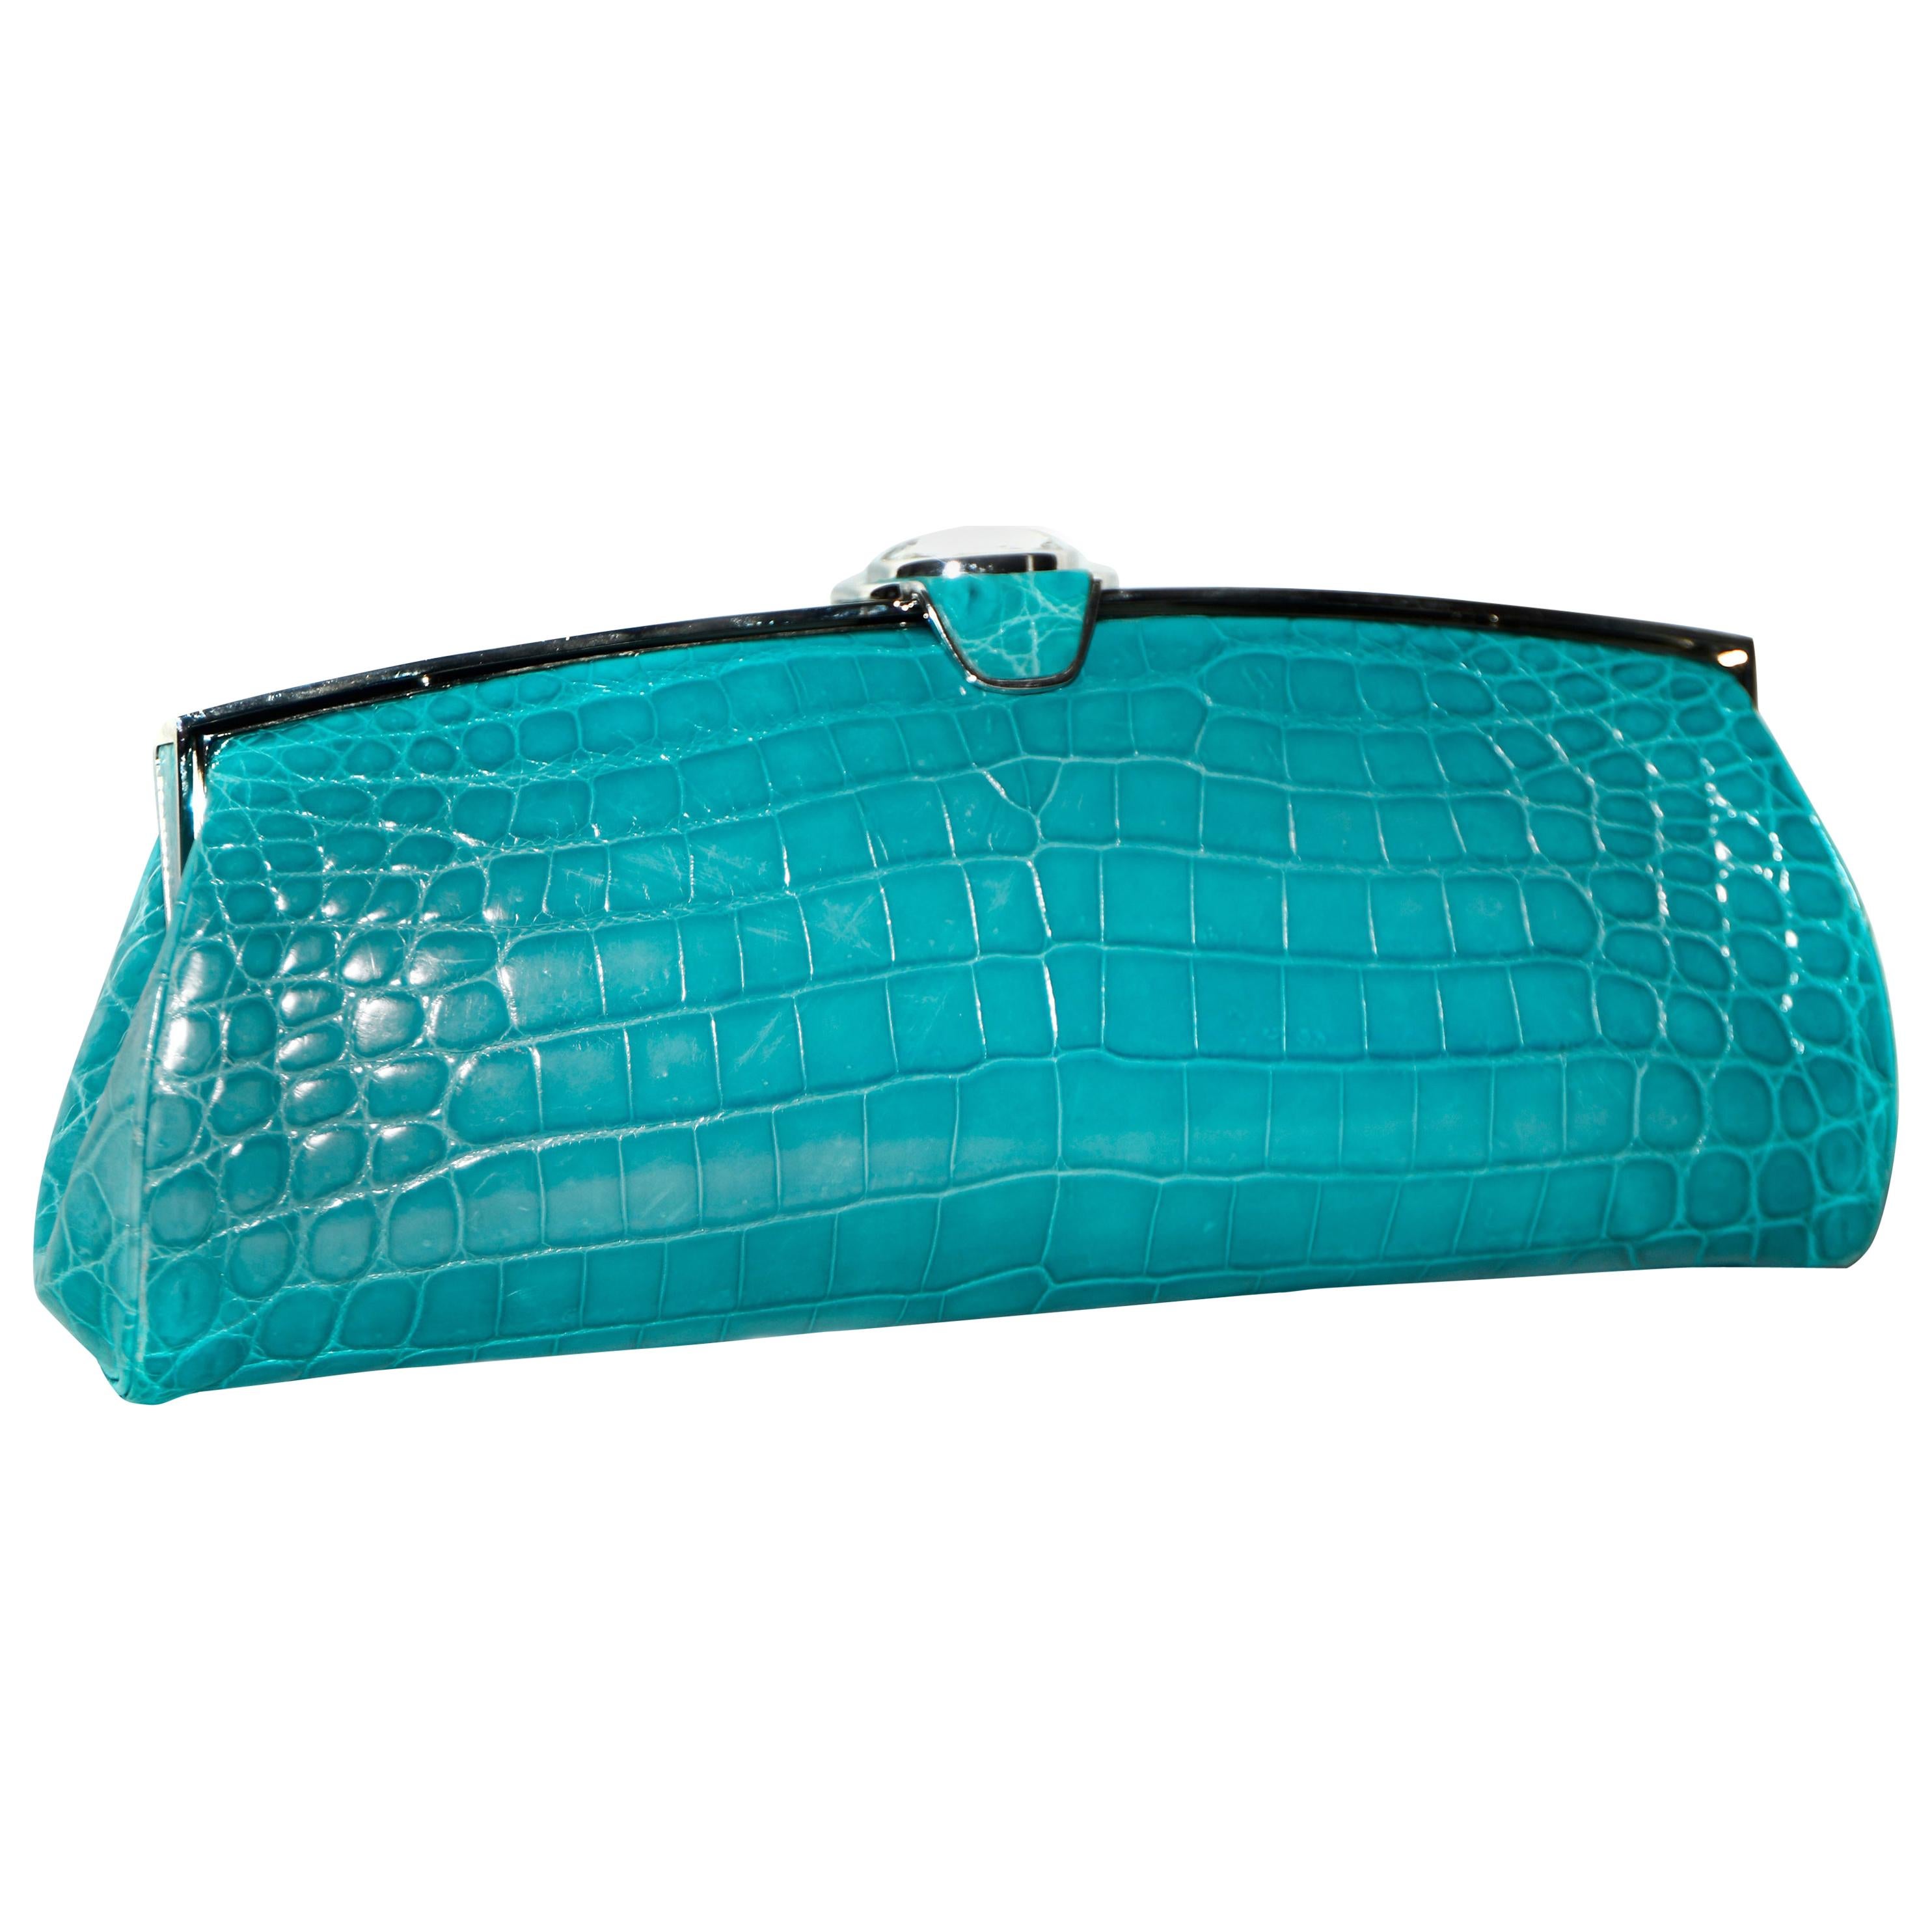 Judith Leiber Turquoise Croc Clutch With Crystal Top Closure For Sale